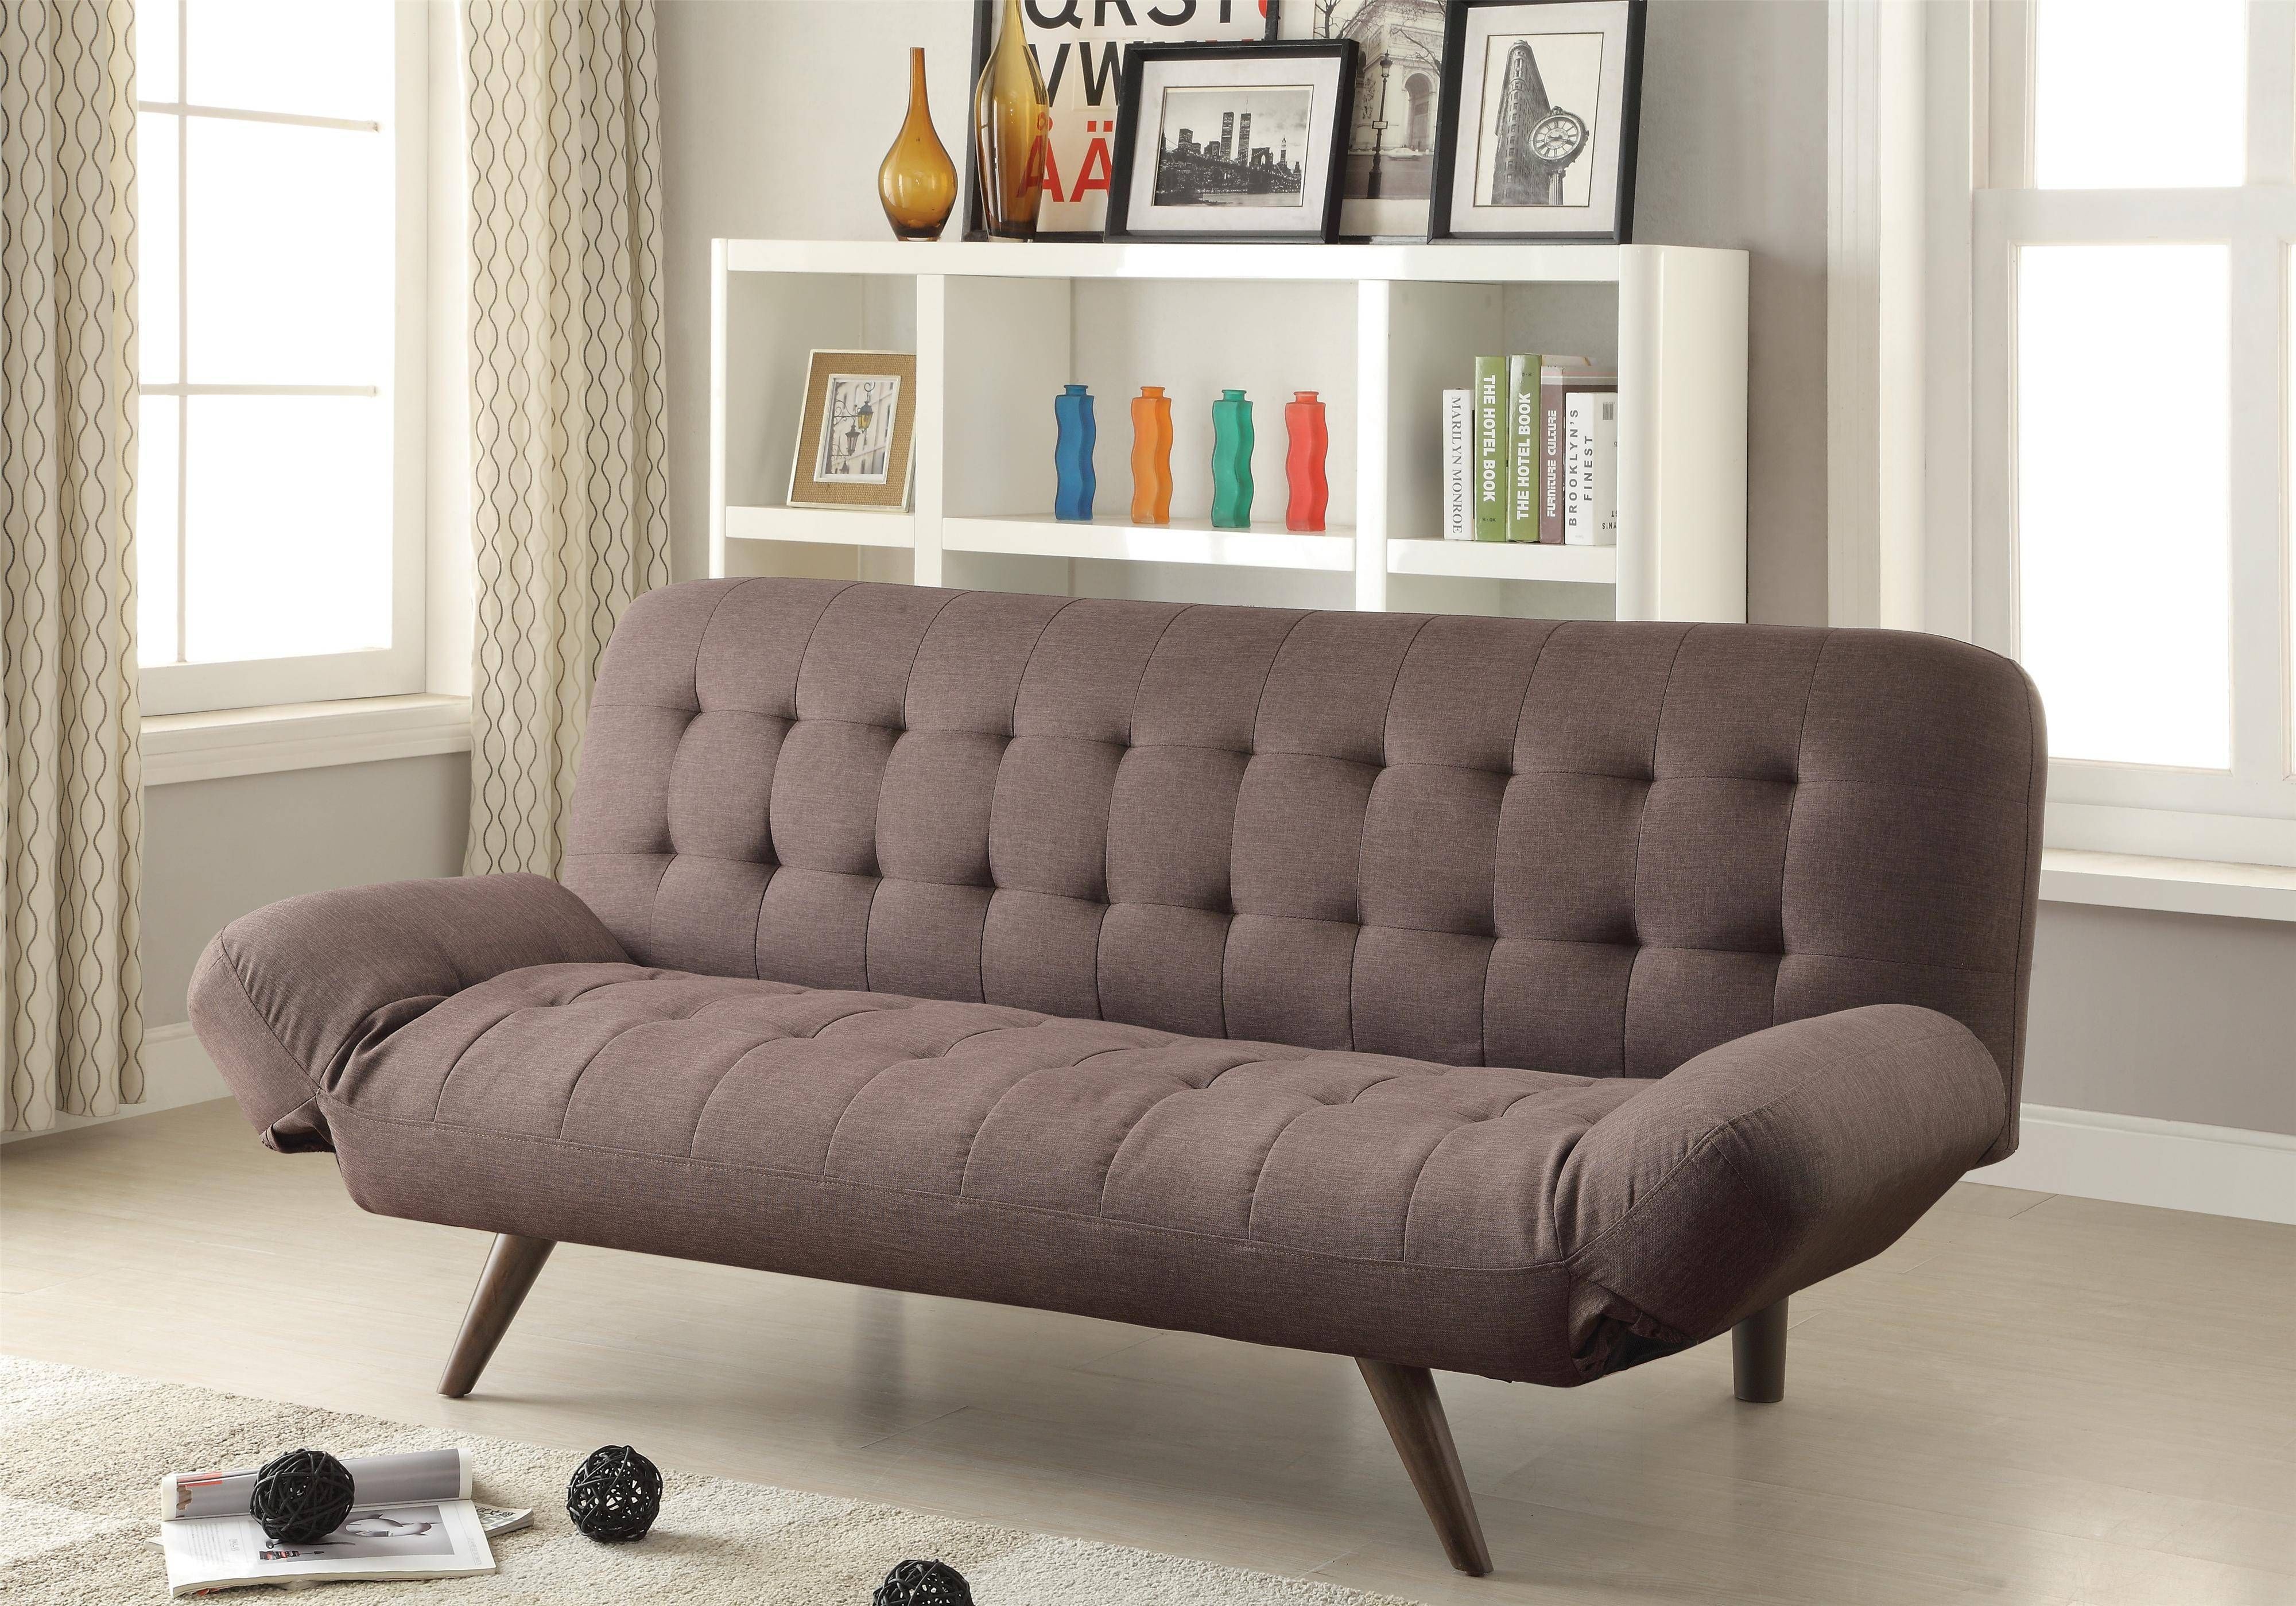 Sofa Beds And Futons Retro Modern Sofa Bed With Tufting & Cone With Coaster Futon Sofa Beds (View 11 of 15)